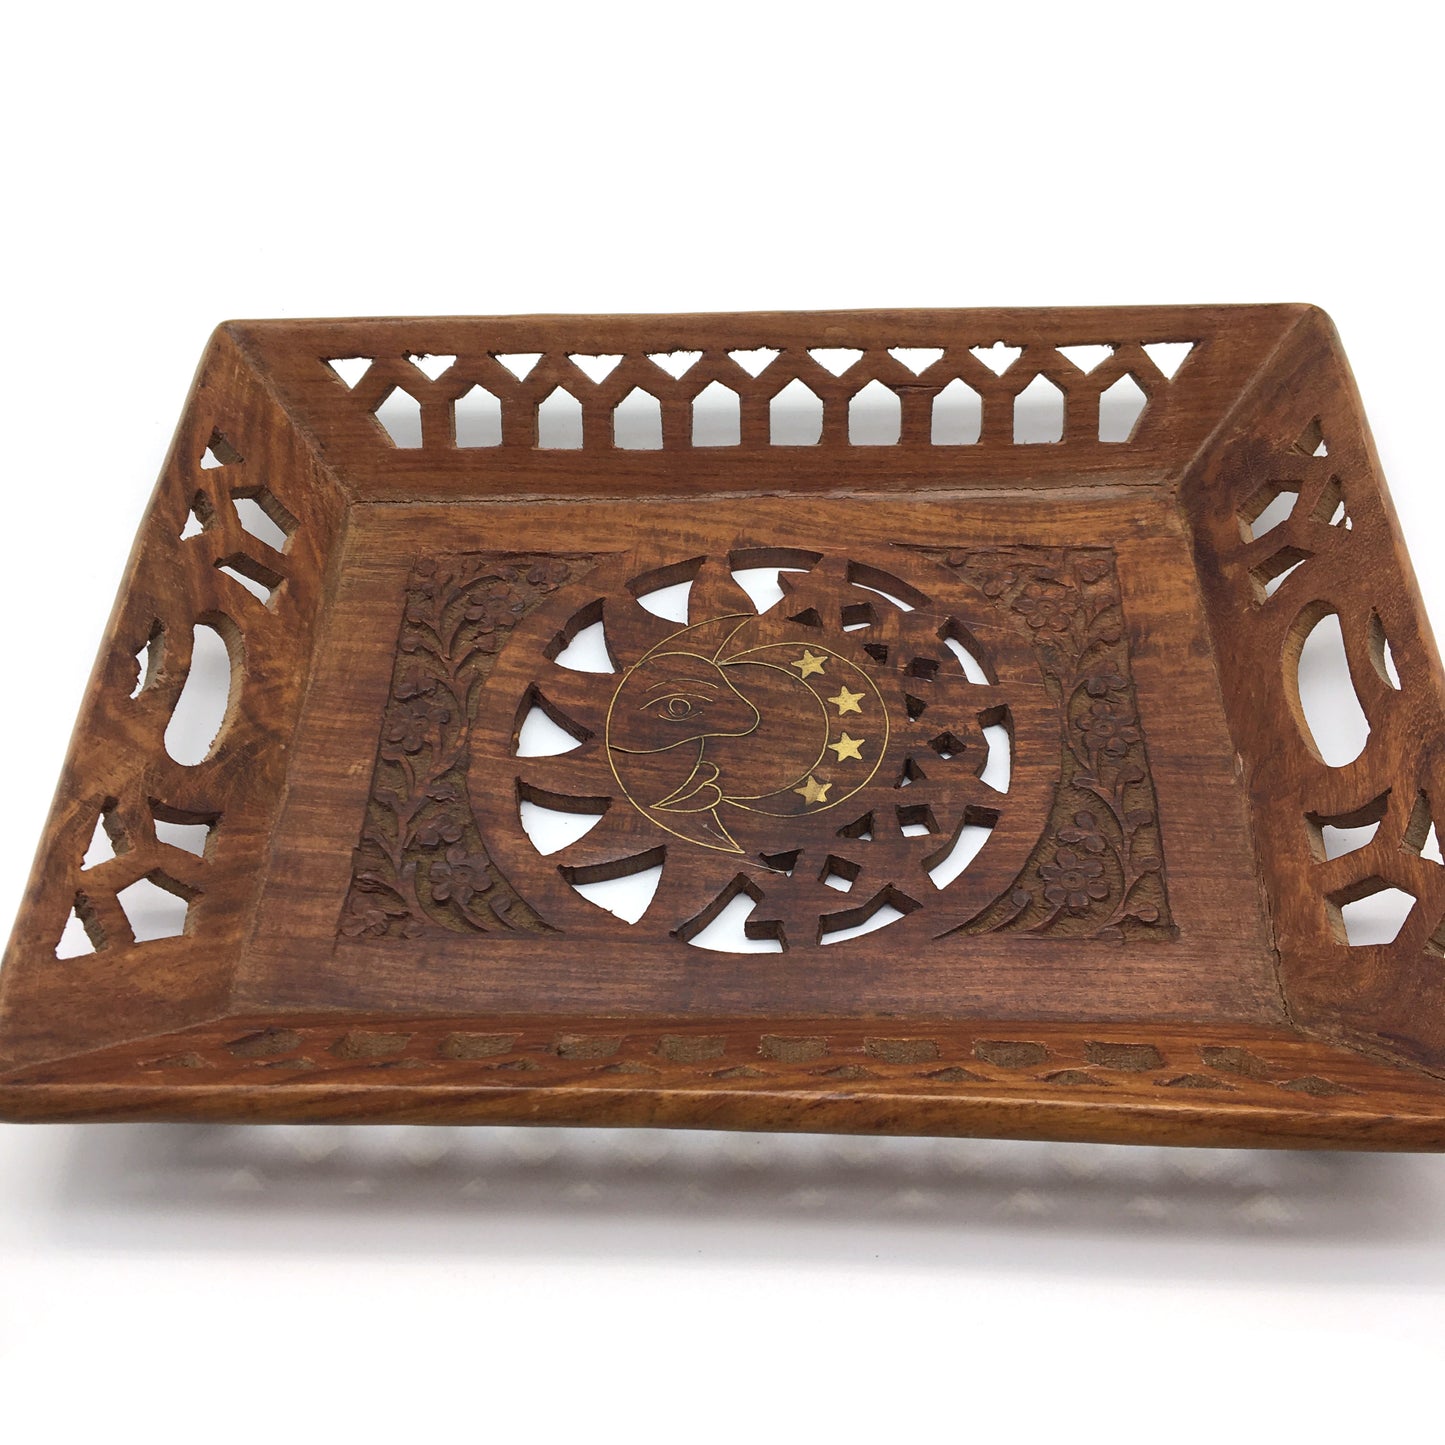 Vintage Rustic India Natural Wooden Decorative Handmade Brass Inlays Tray